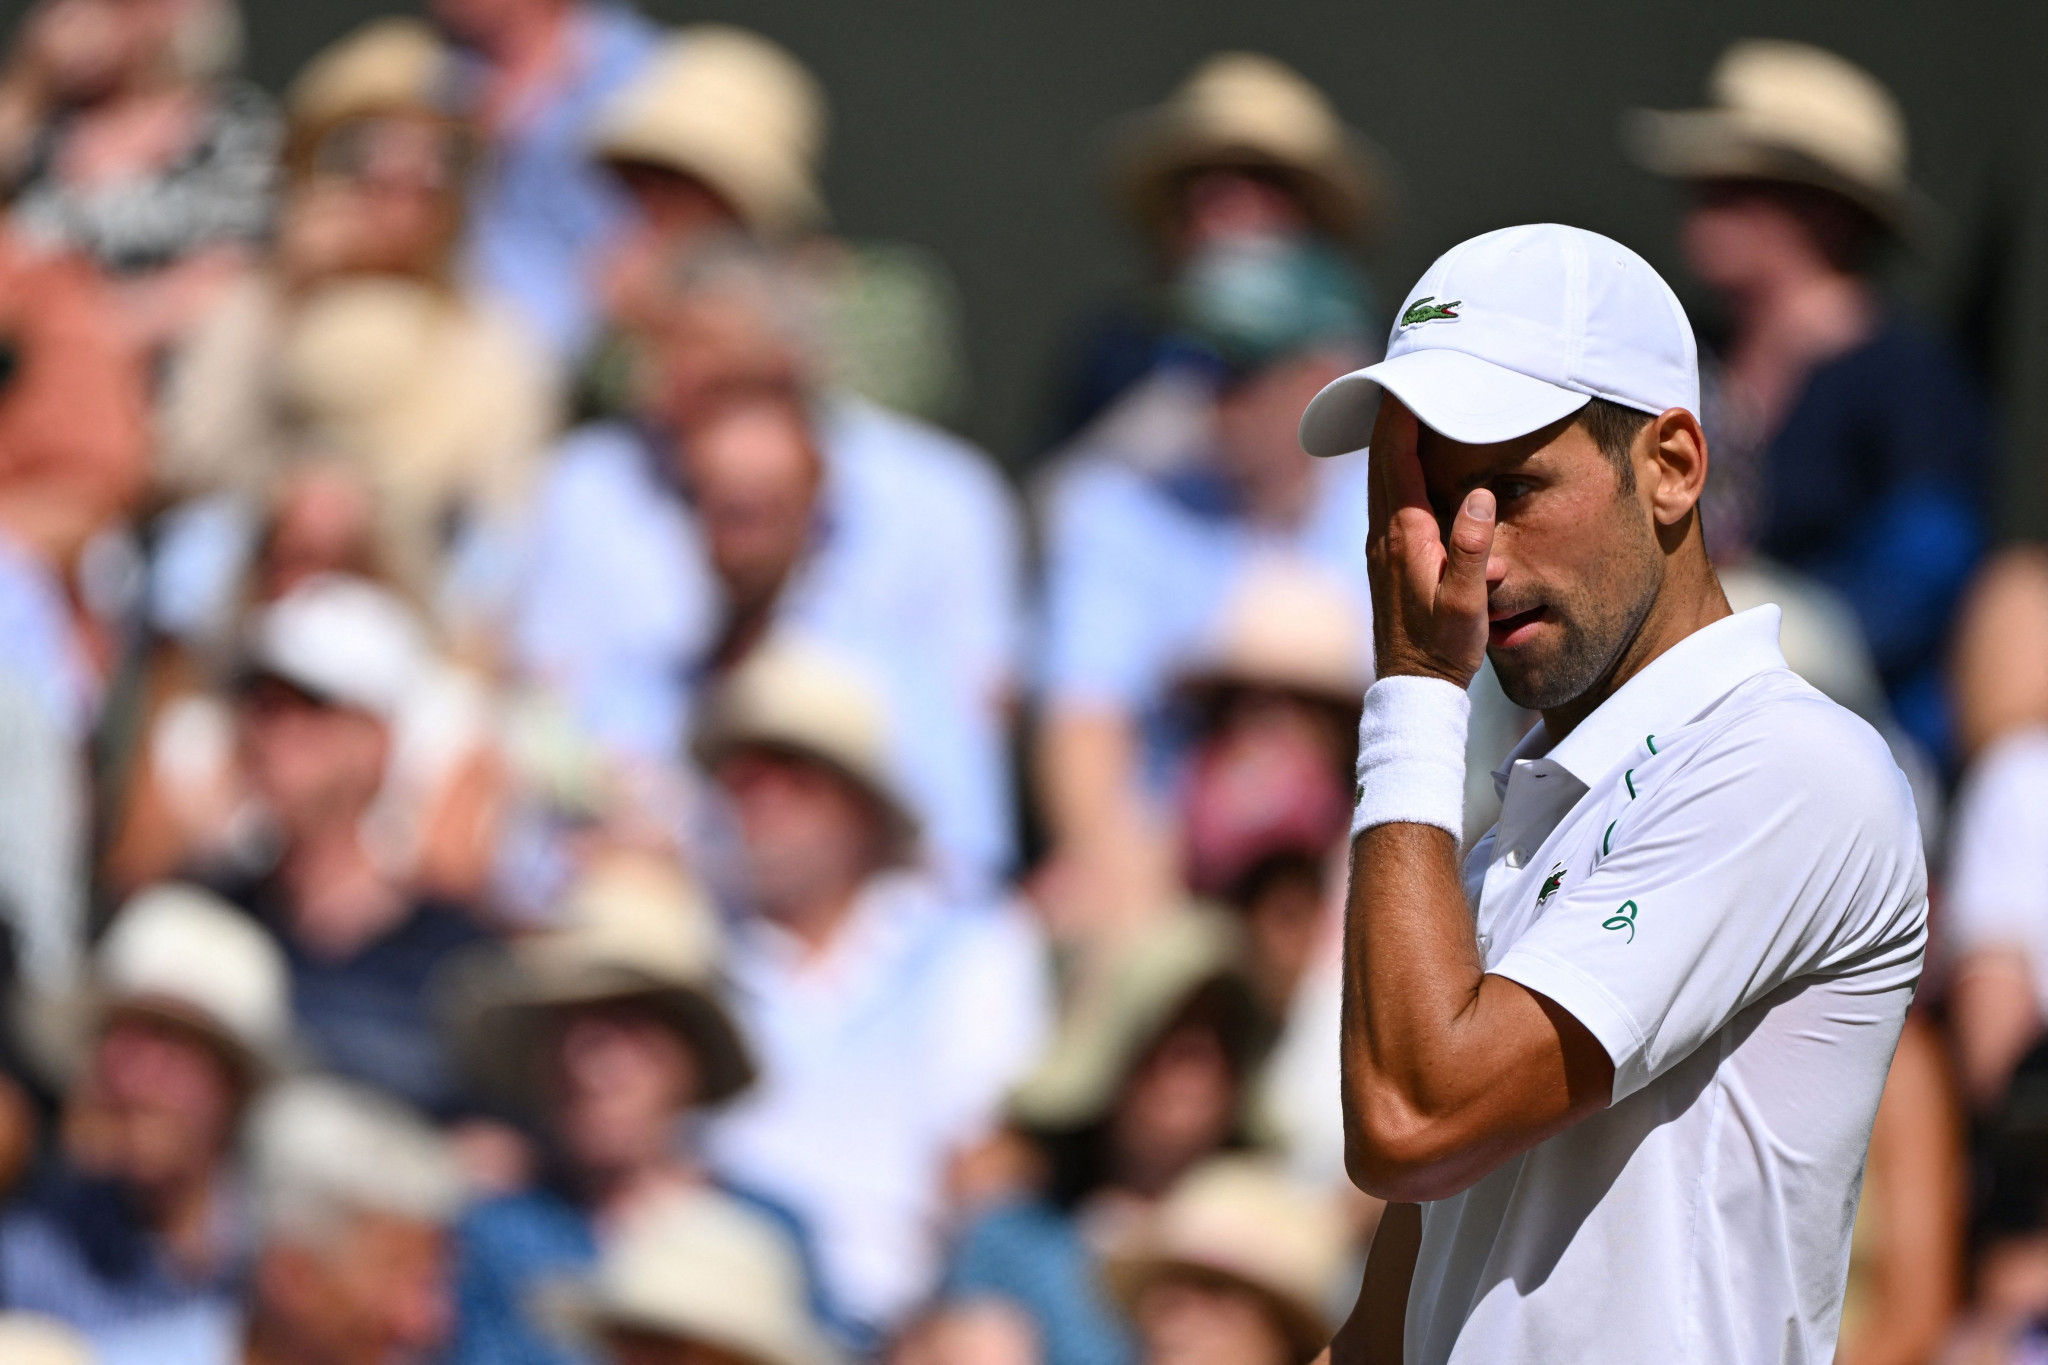 Unvaccinated Djokovic pulls out of US Open